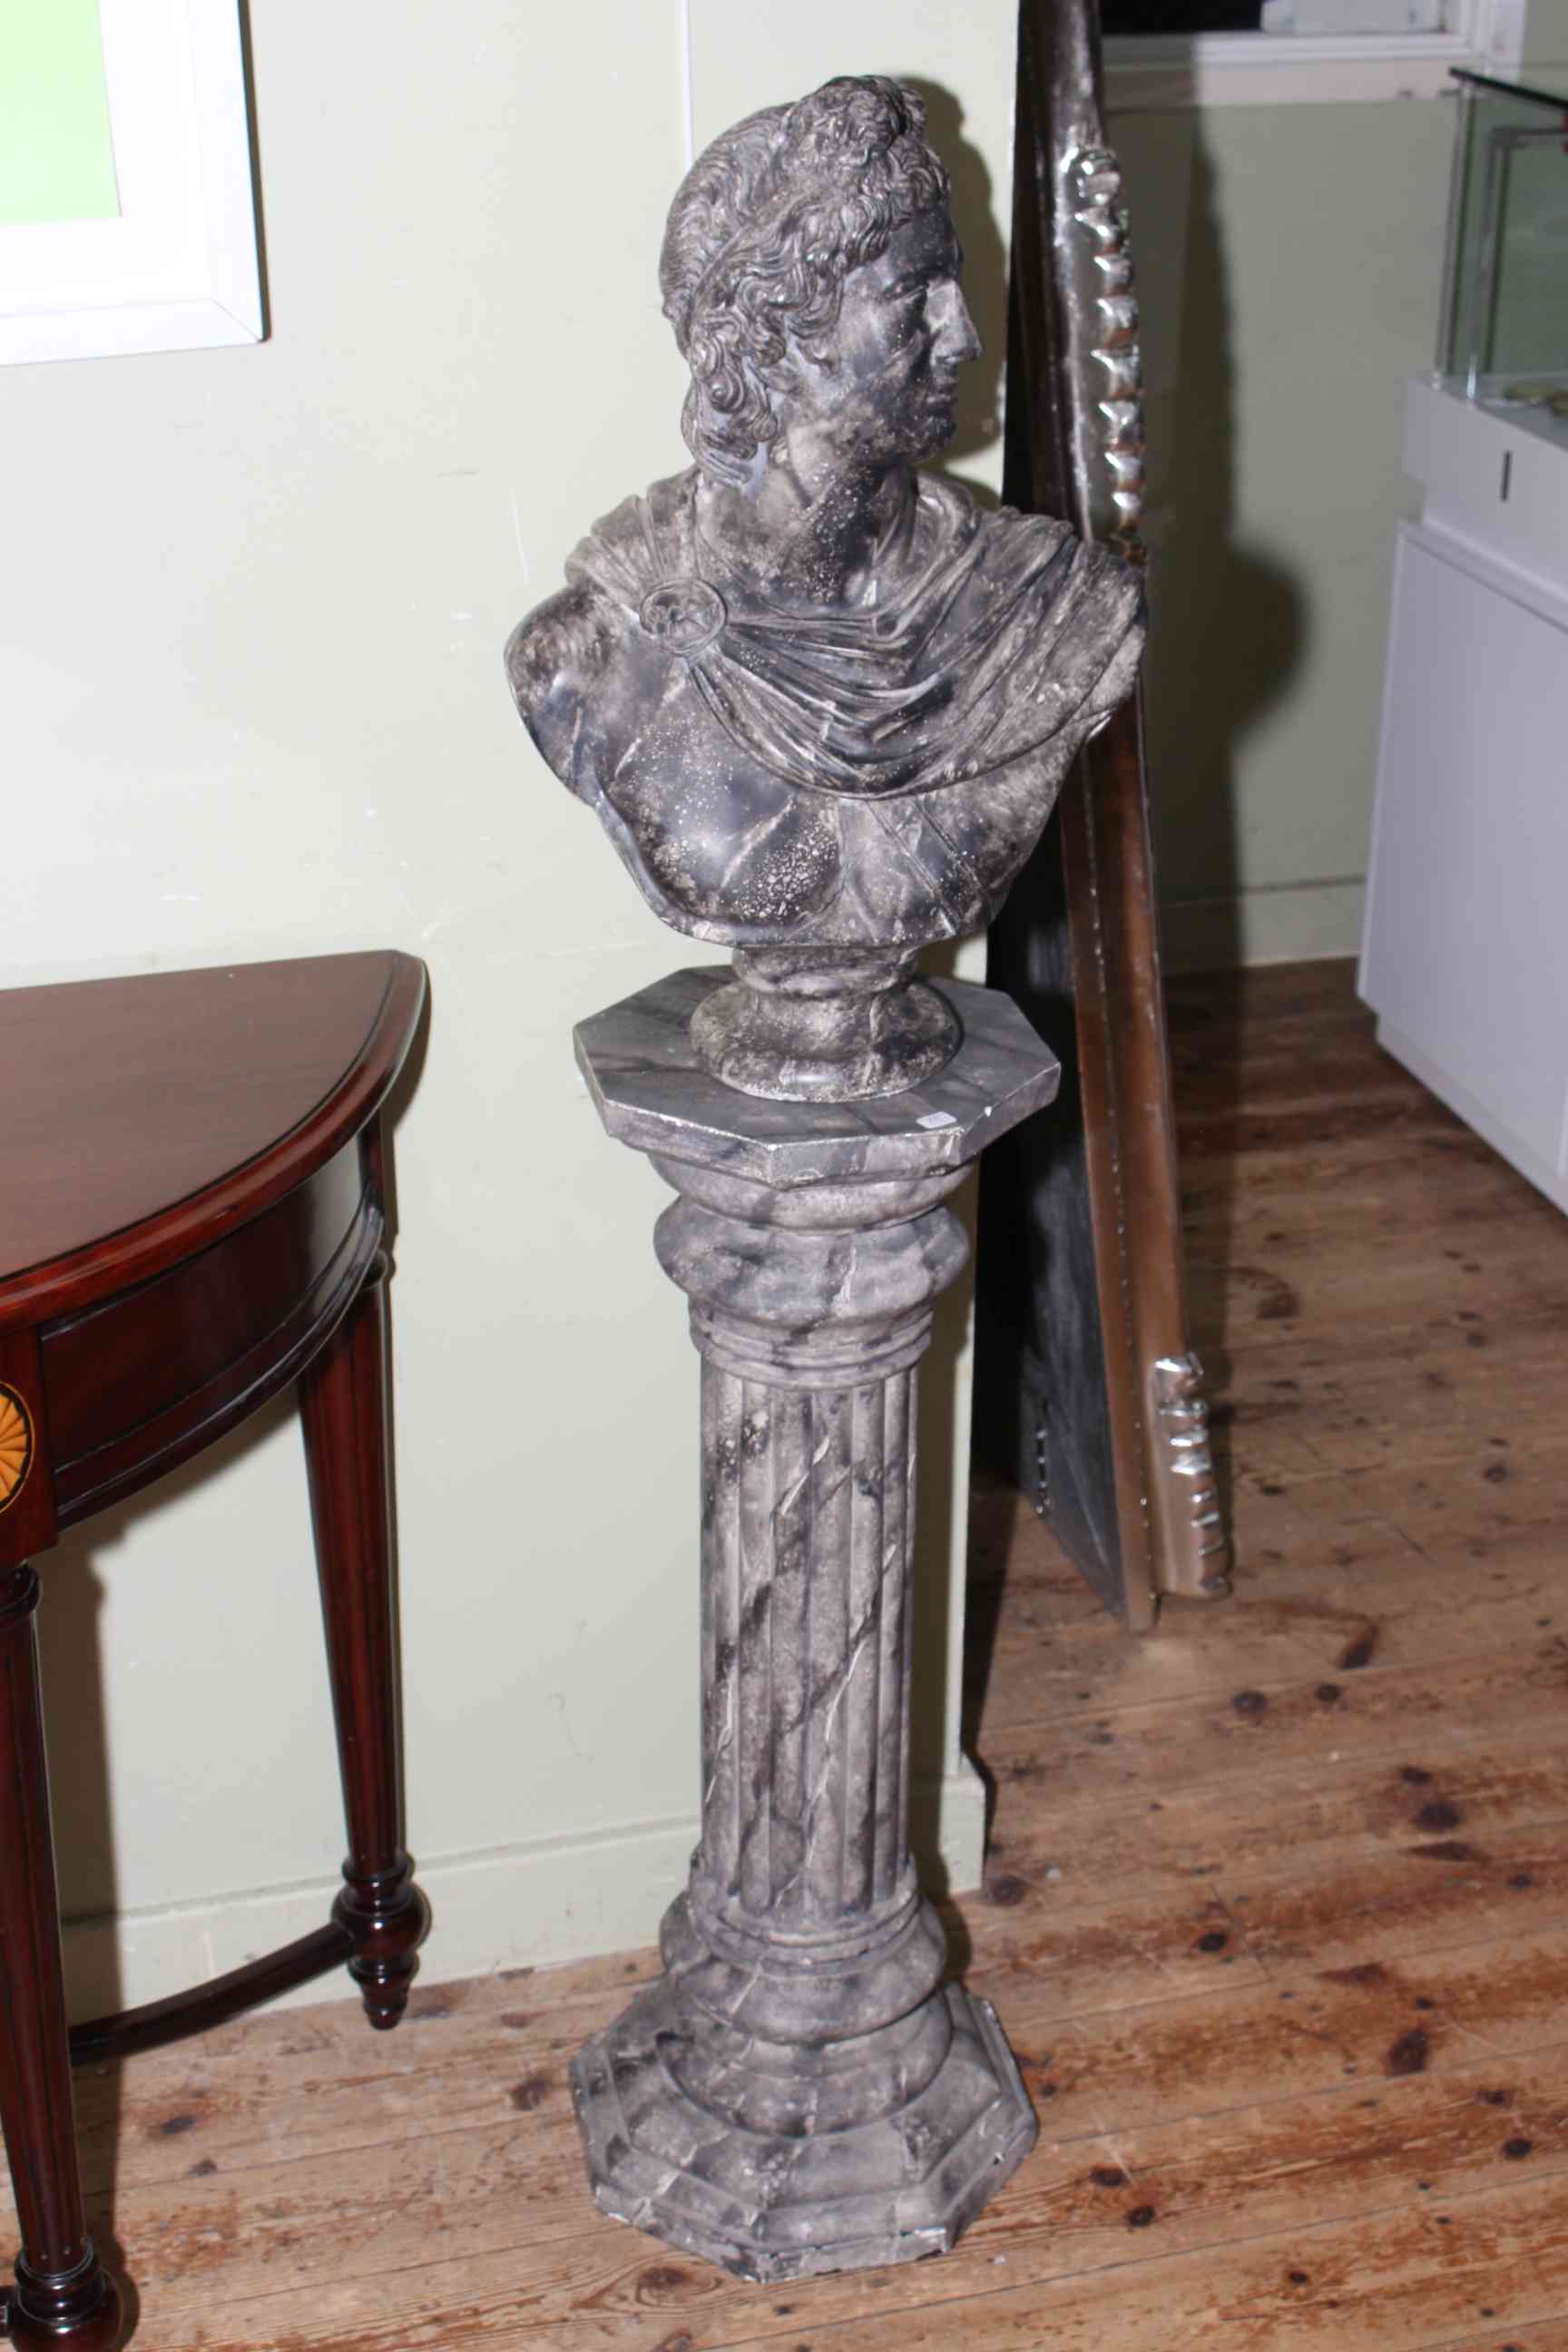 Marble style bust and stand depicting Greek Warrior, 130cm high.